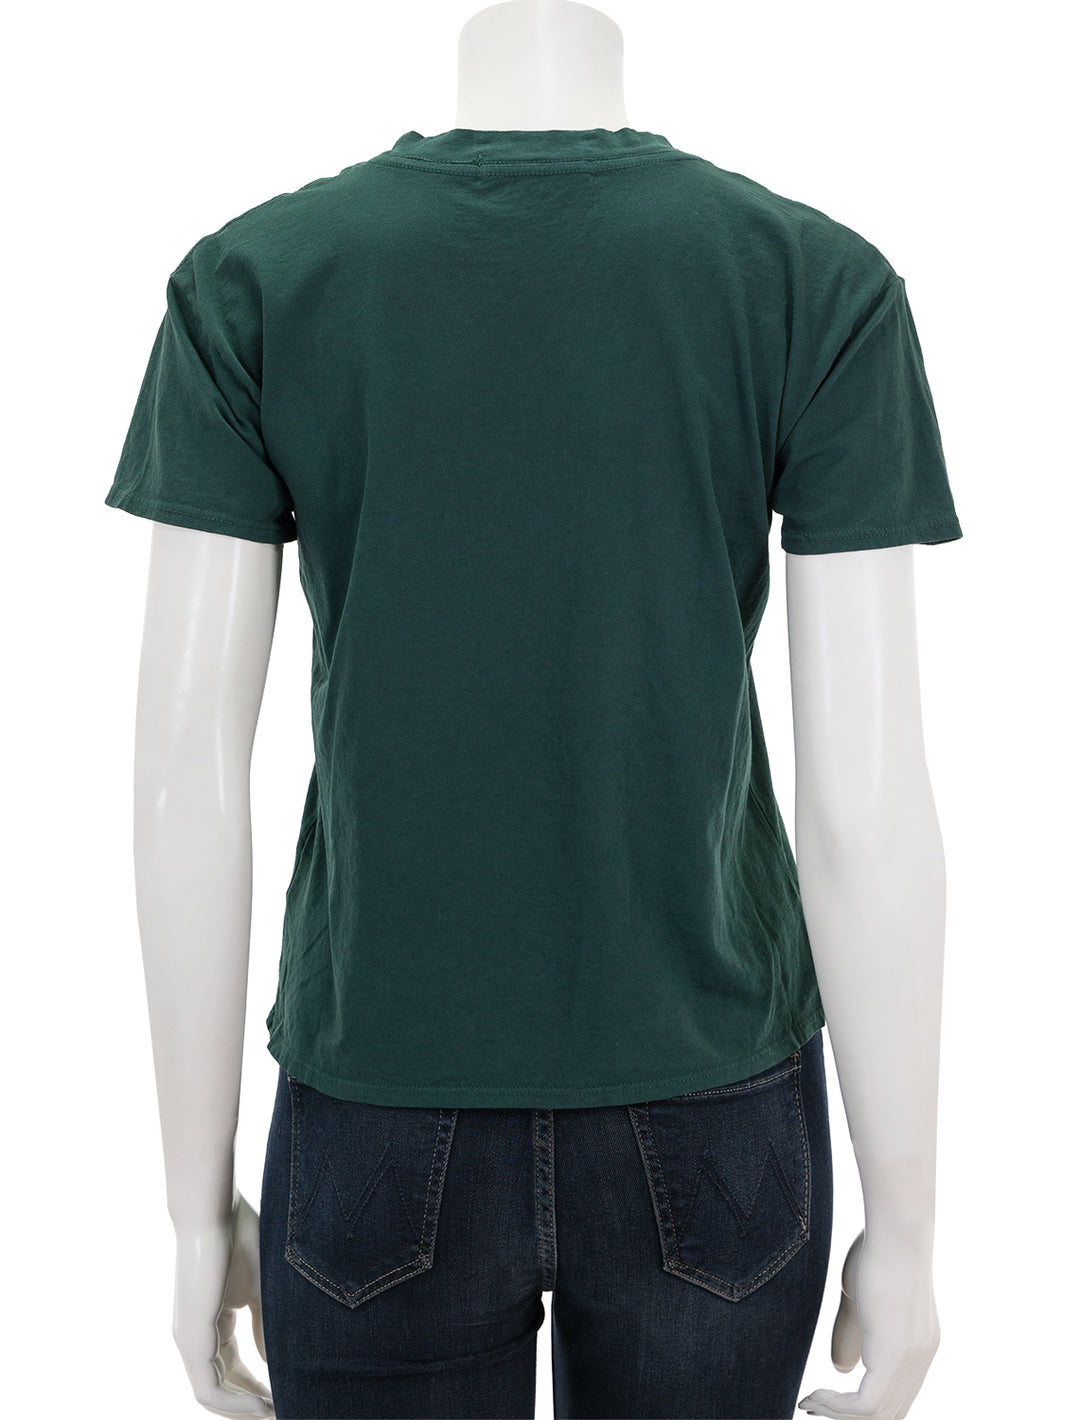 Back view of Perfectwhitetee's harley tee in pine.